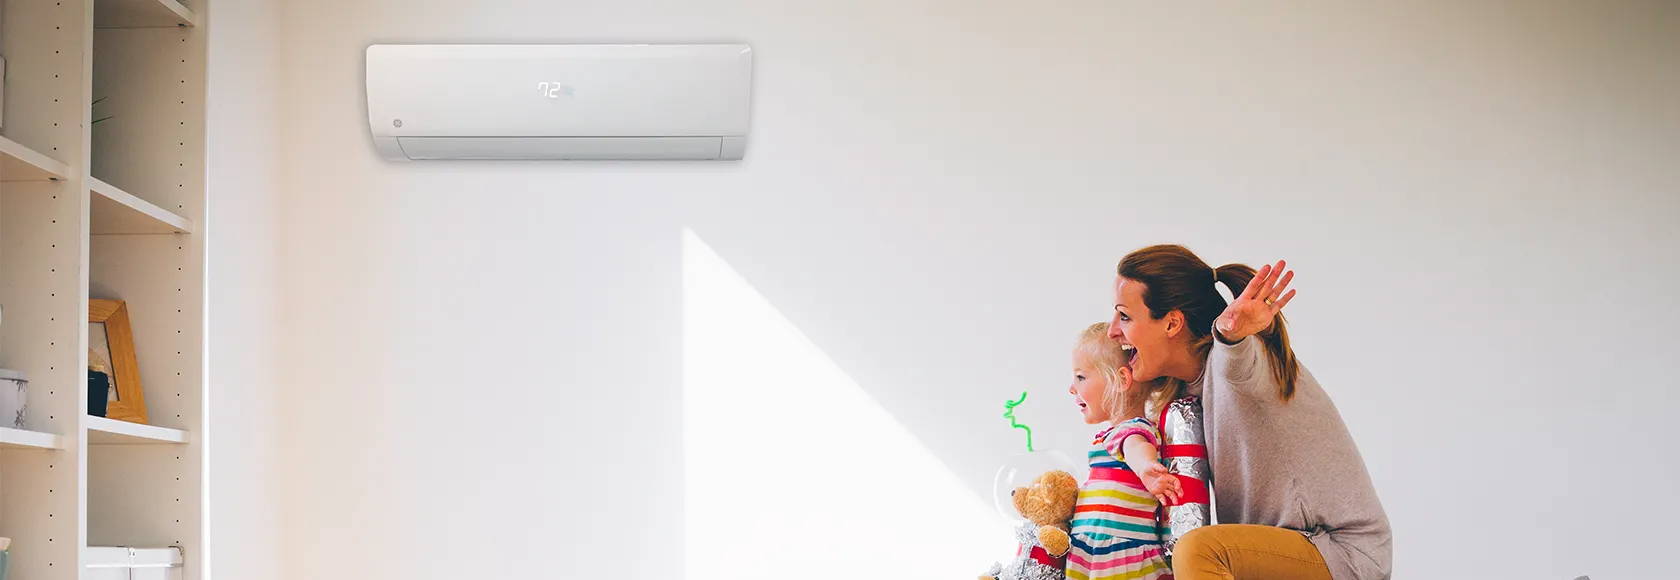 Mini Split Ductless Heating & Cooling Systems